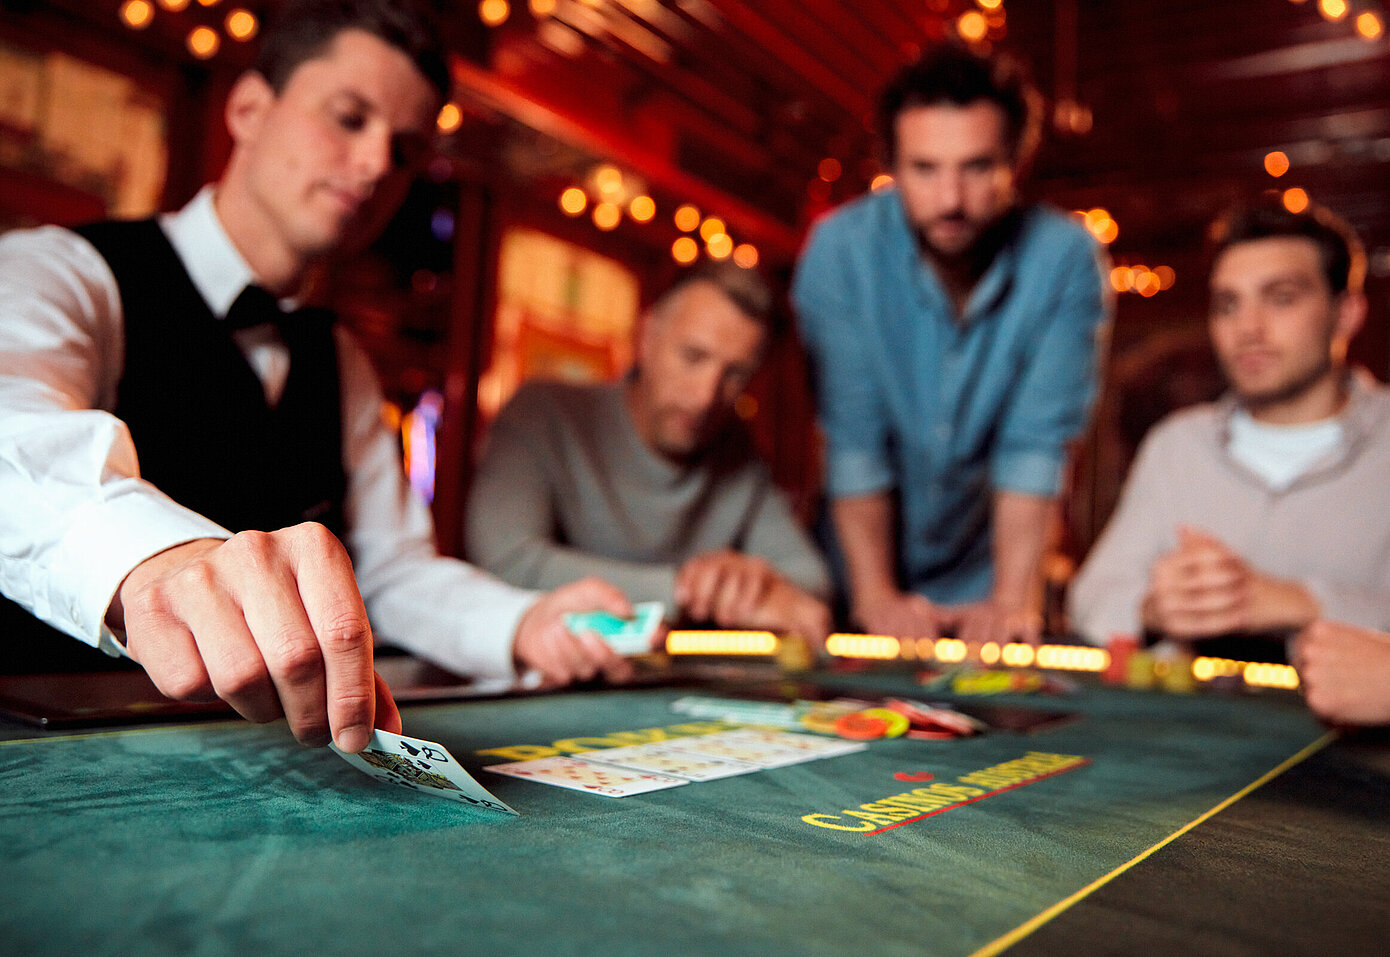 Online Casino – What Exactly is an Online Casino?